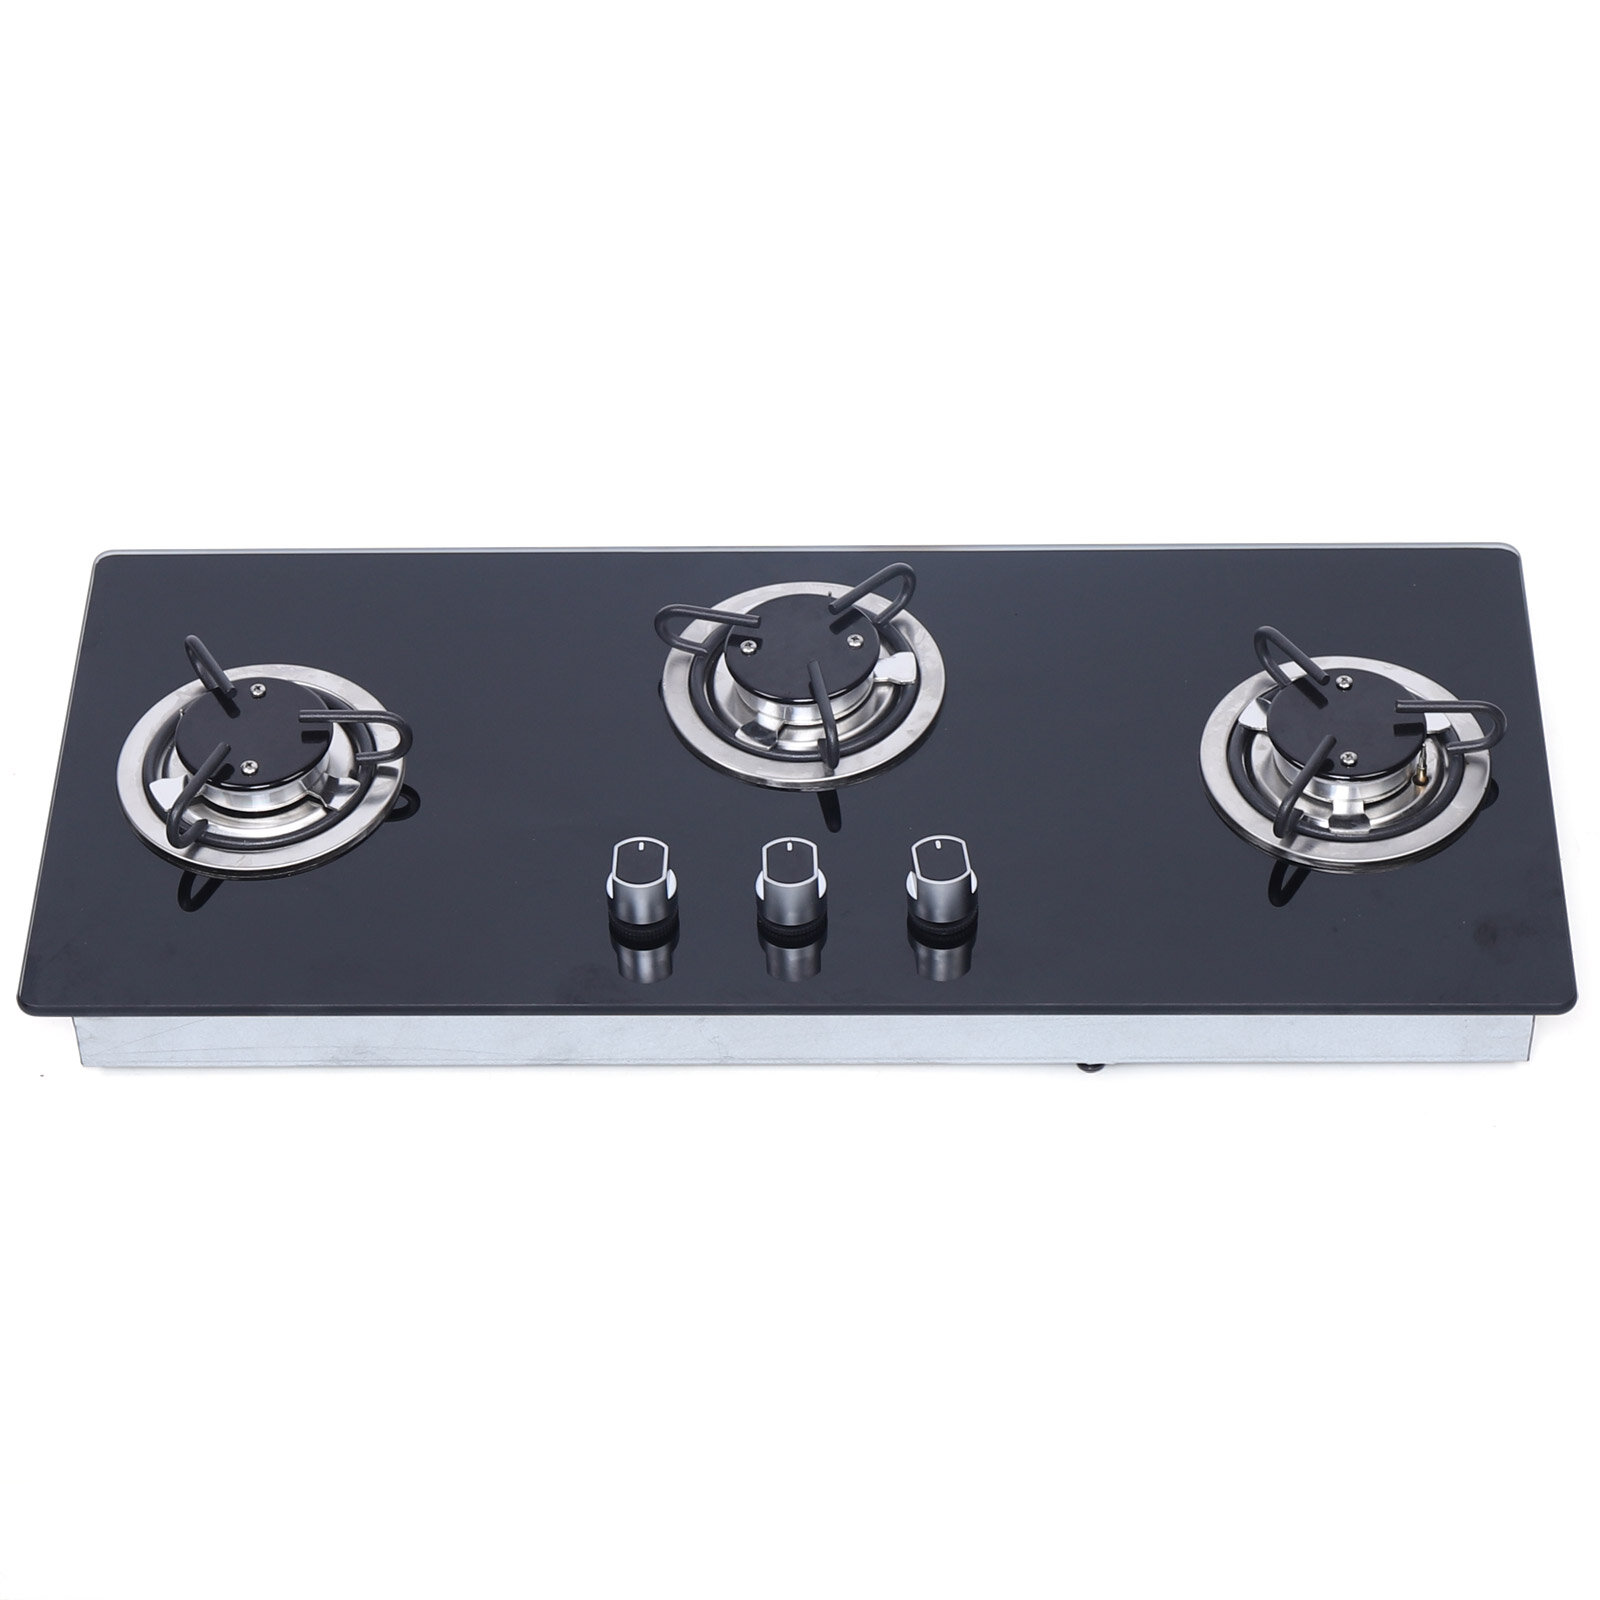 2 Burner LPG Gas Stove With Tempered Glass For RV